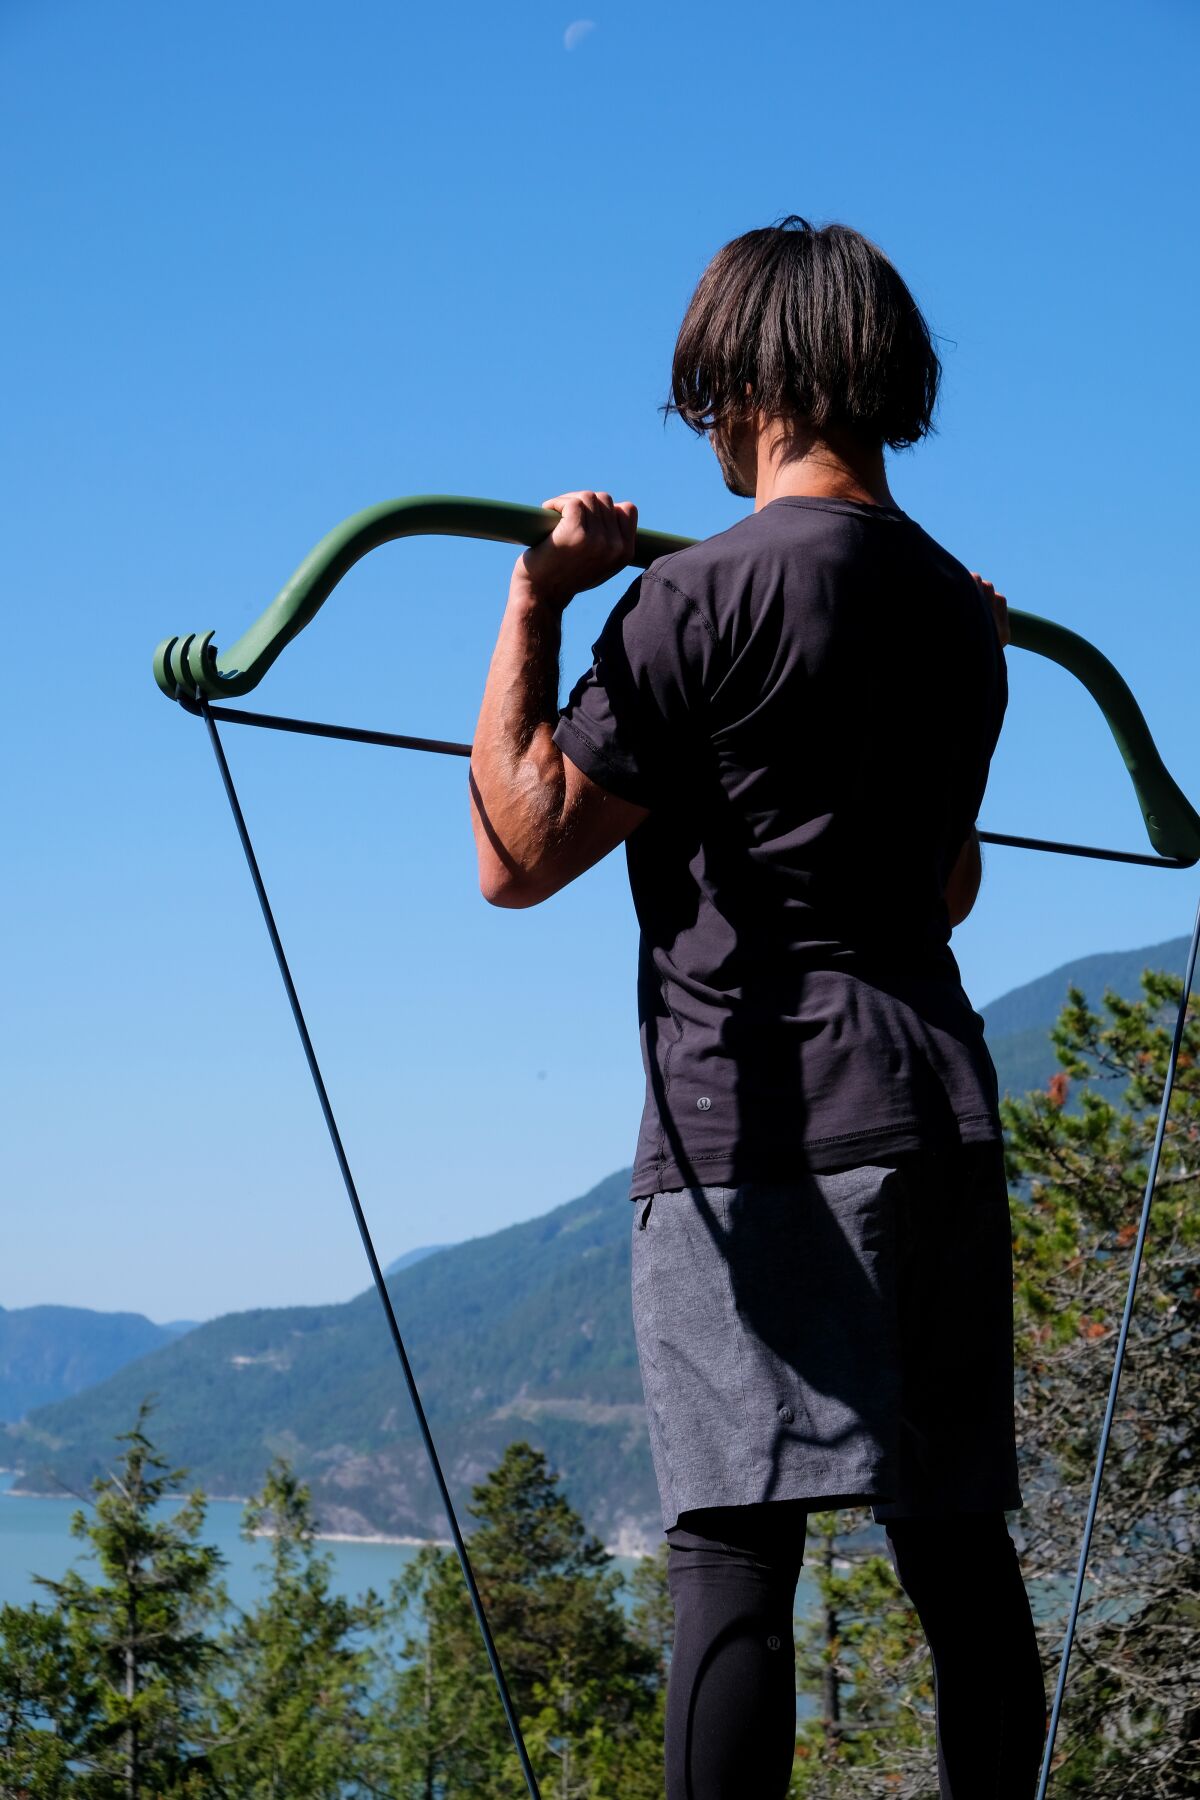 The GorillaBow is a portable home gym that combines stretch cords with a pseudo-bow-hunting frame.